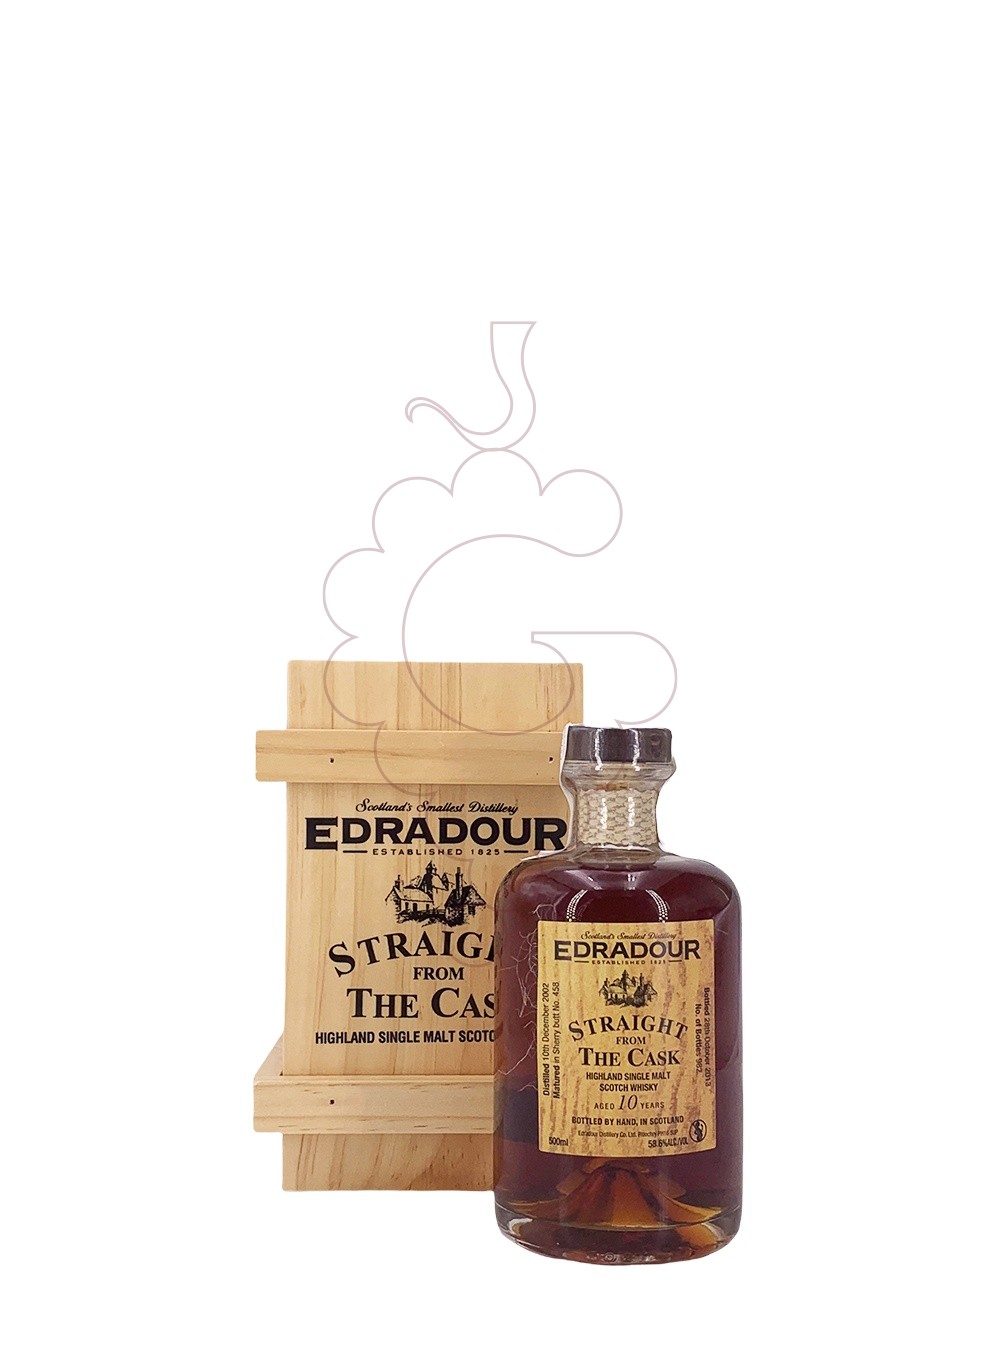 Foto Whisky Edradour Straigt from the Cask 10 Años